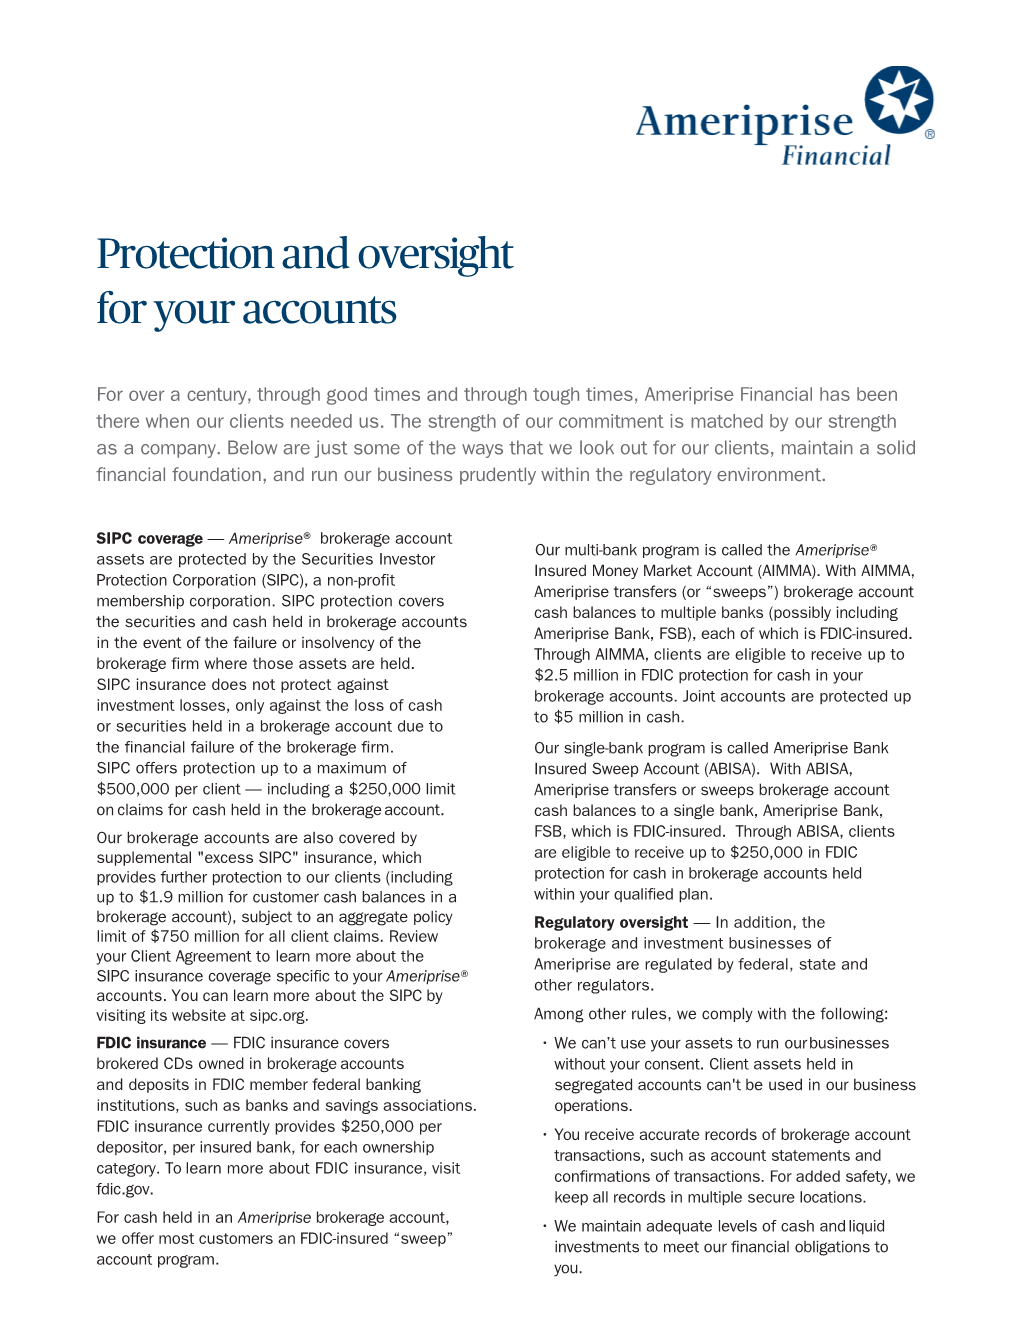 Protection and Oversight for Your Accounts